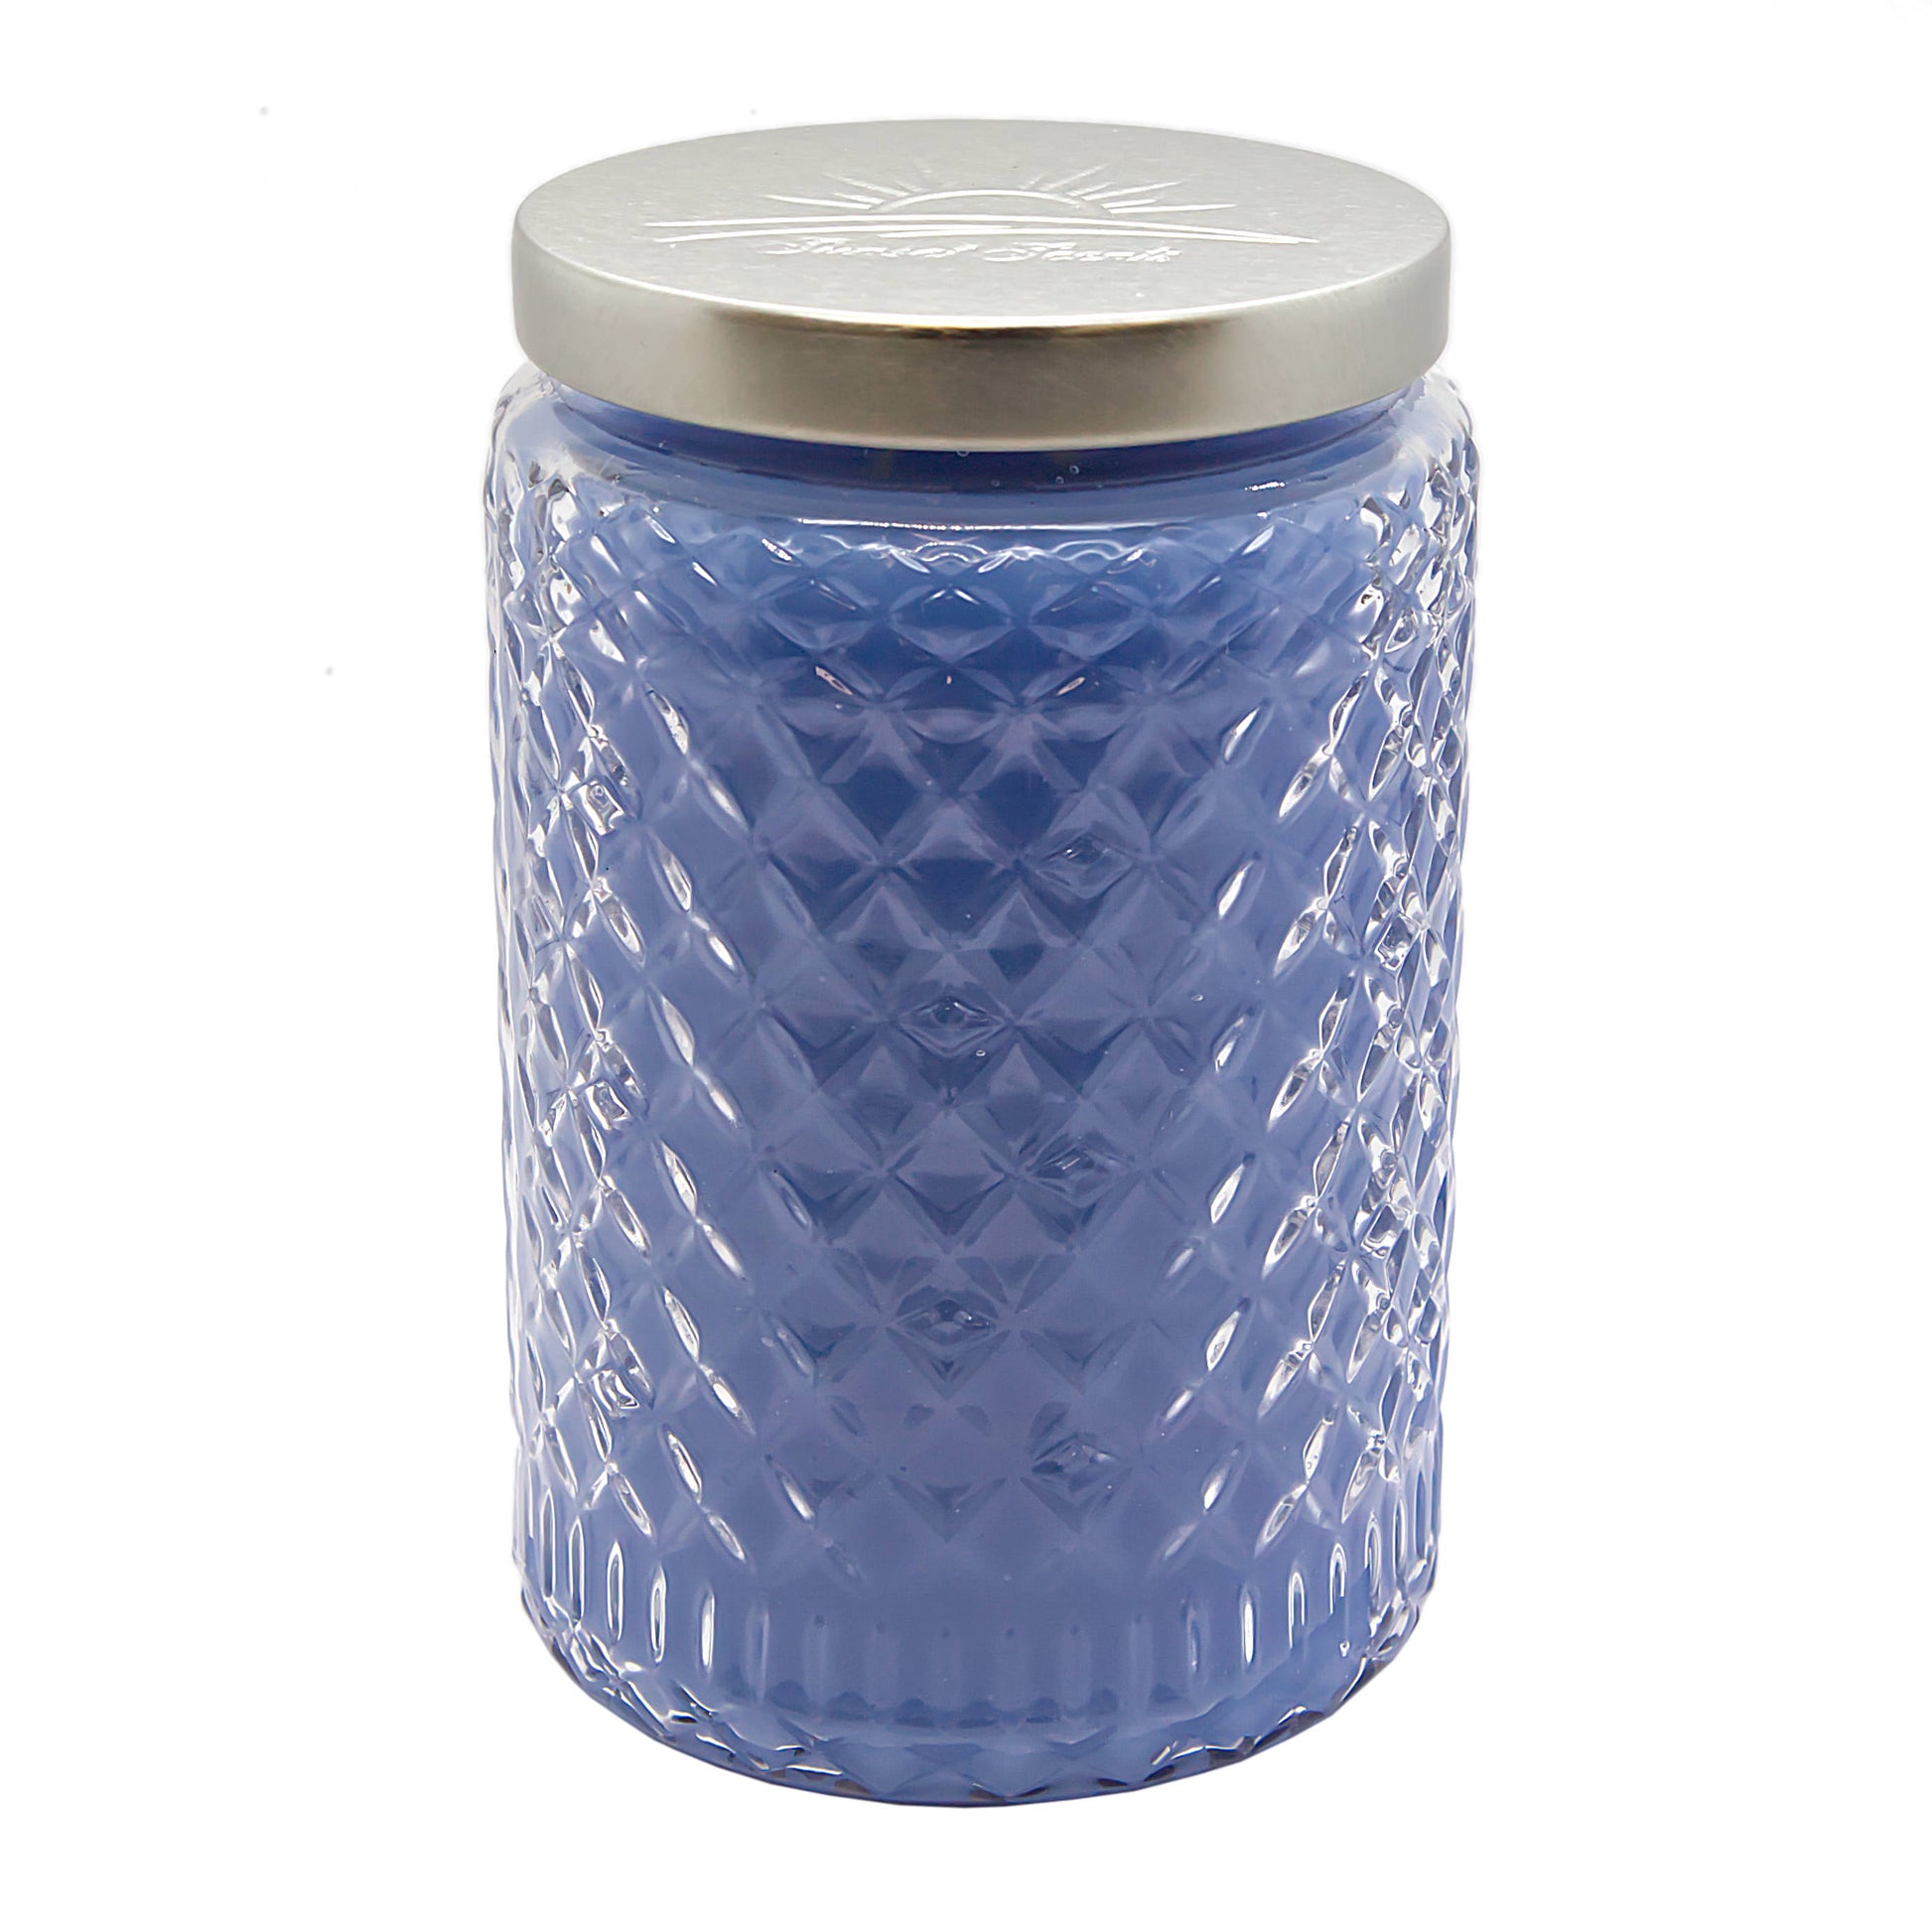 Rainshower Scented Candle big